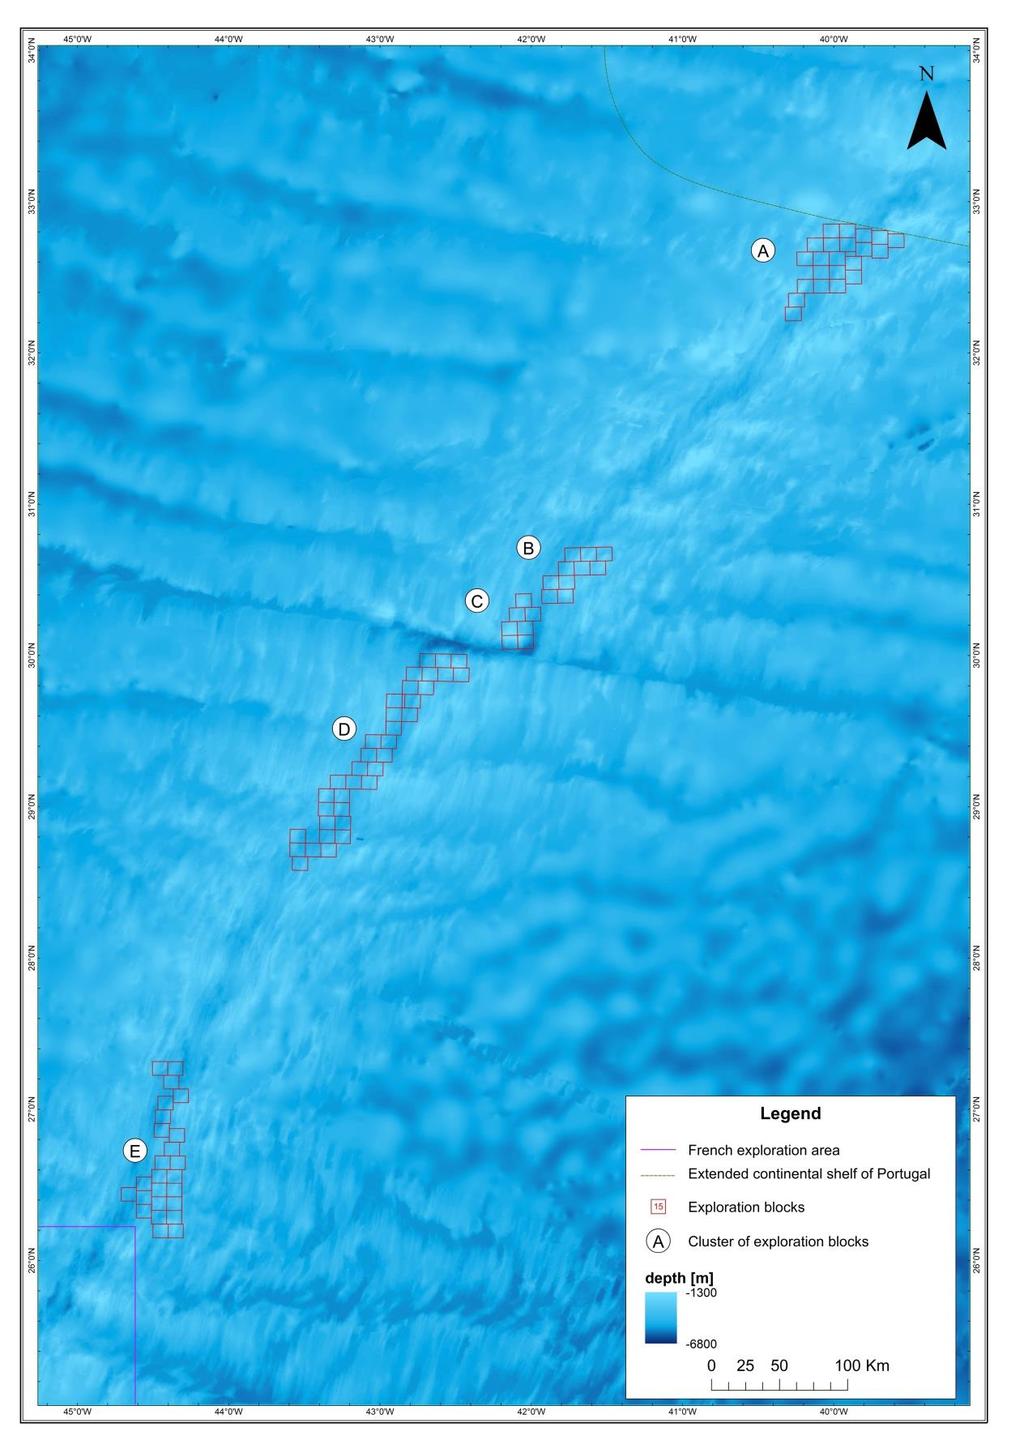 Bathymetric map showing the detailed